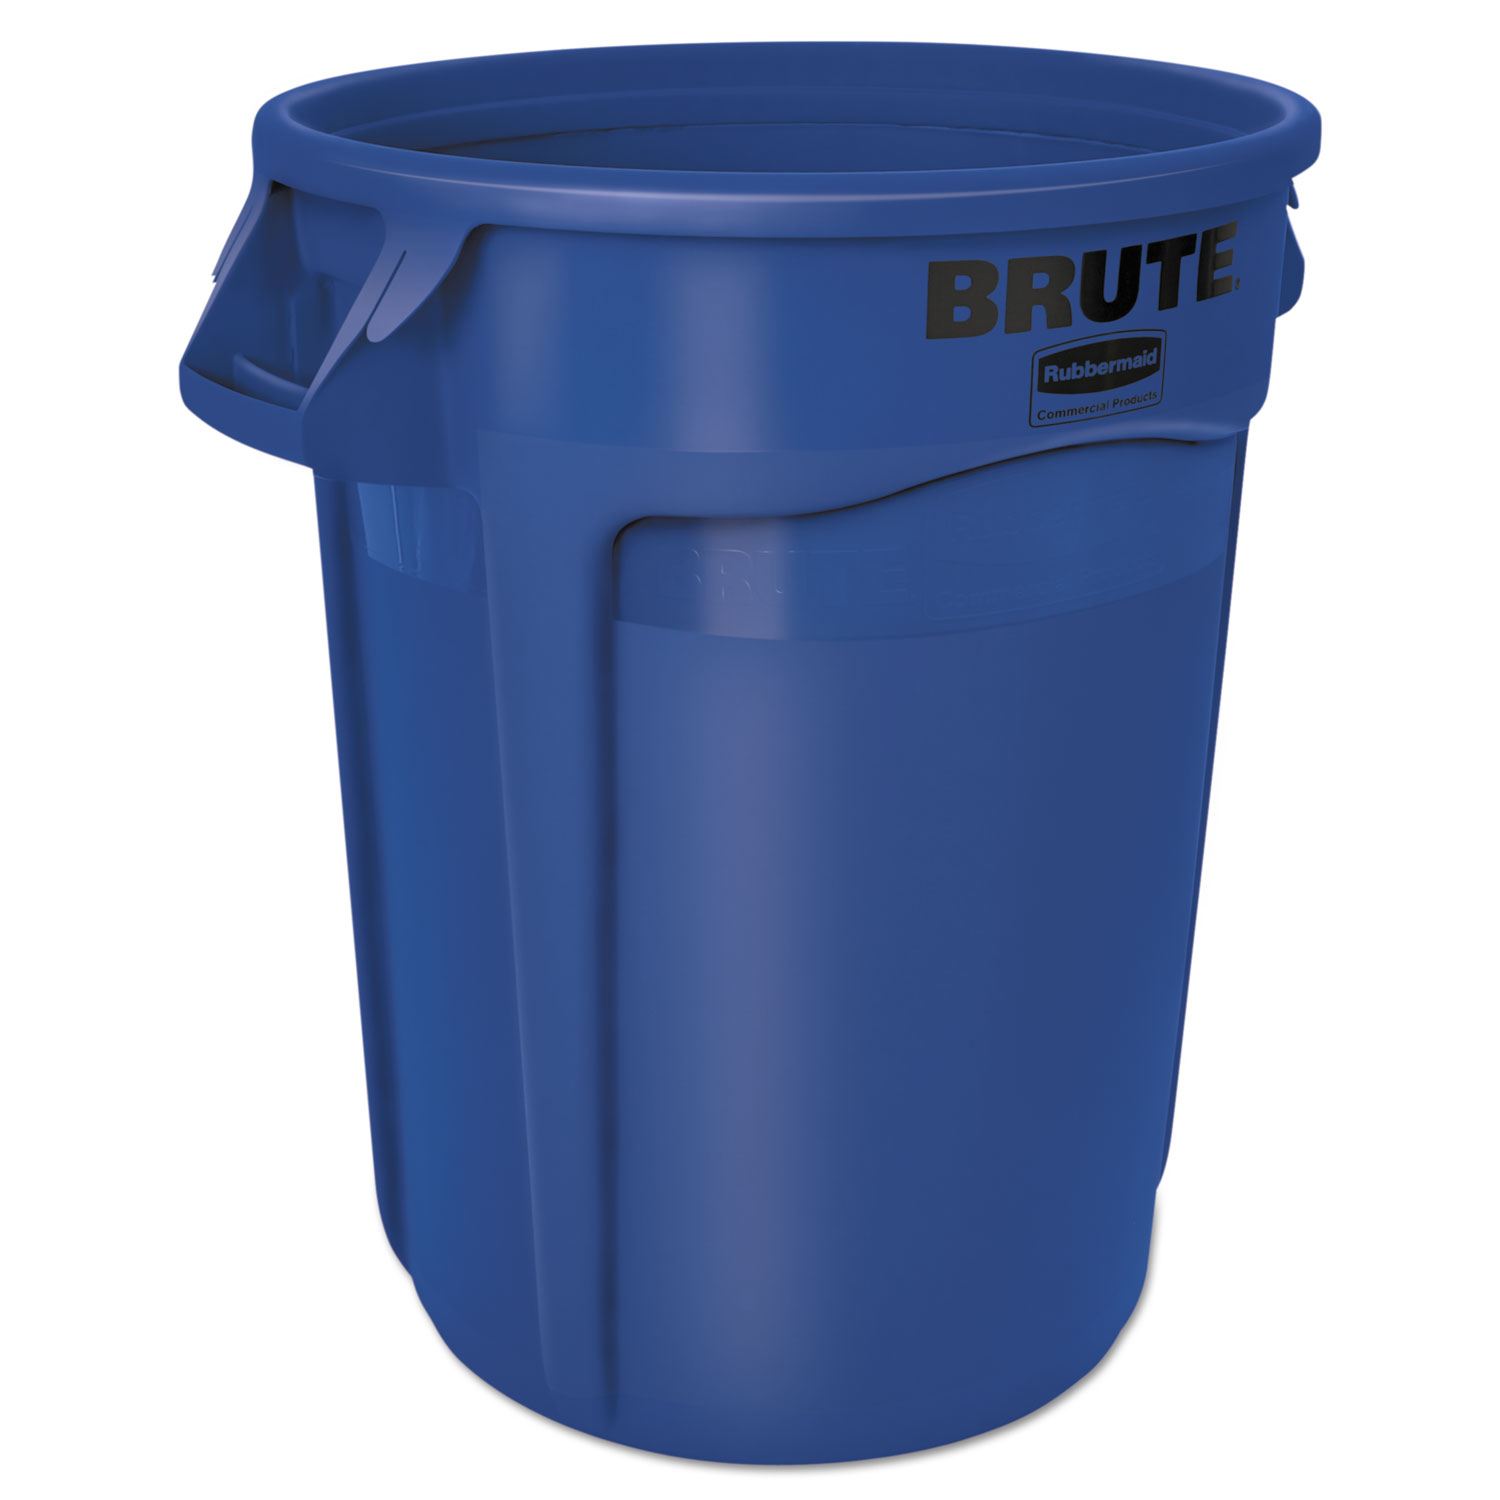  Rubbermaid Commercial FG263200BLUE Round Brute Container, Plastic, 32 gal, Blue (RCP2632BLU) 